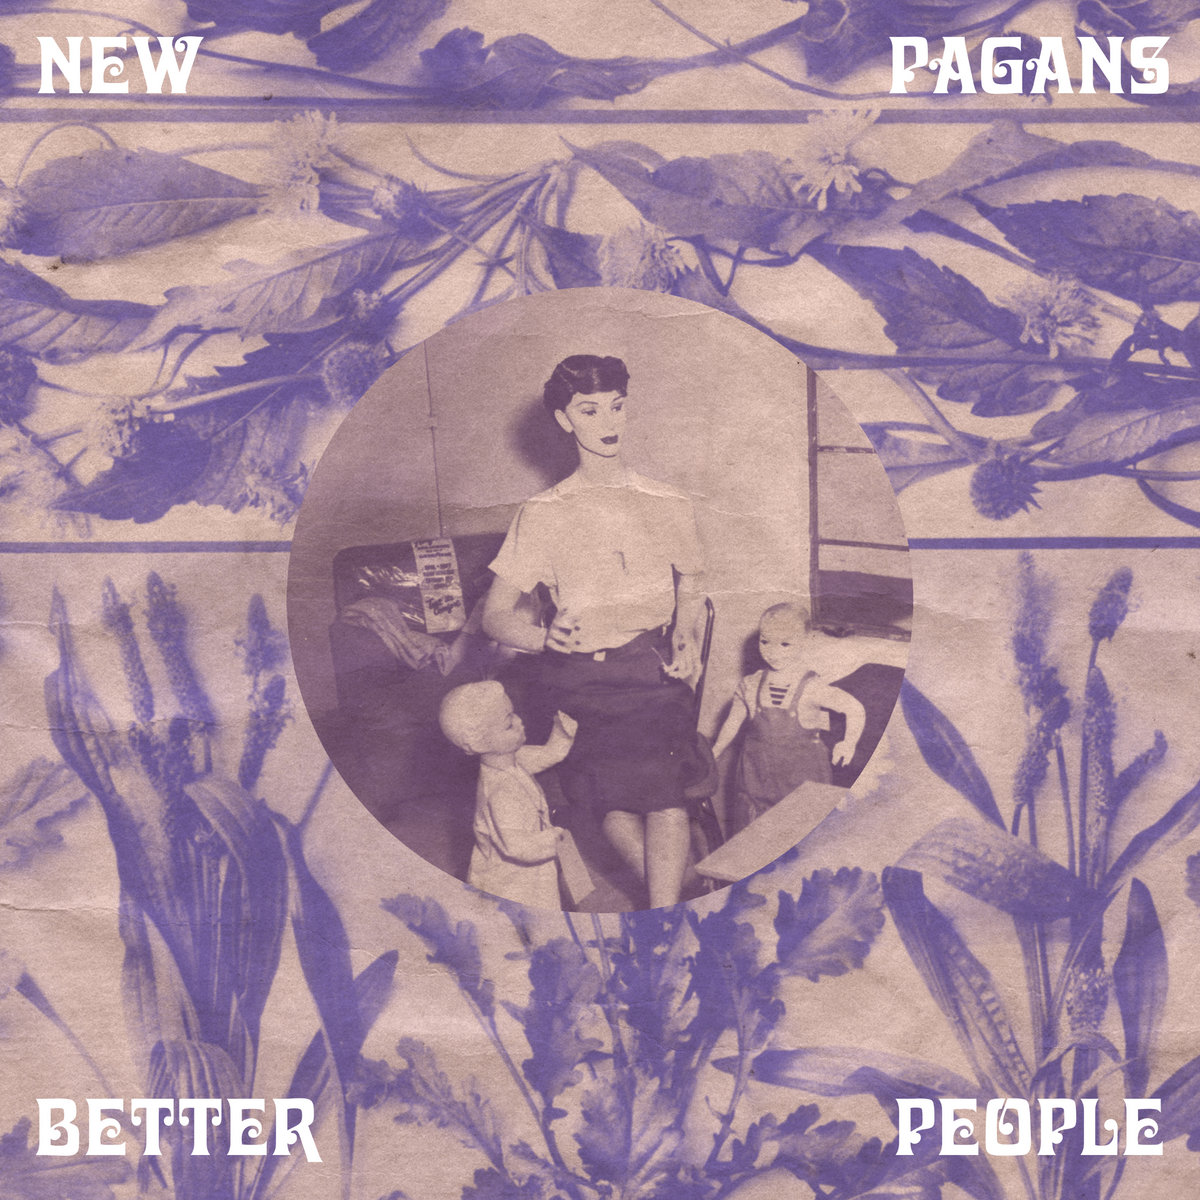 New Pagans – “Better People”